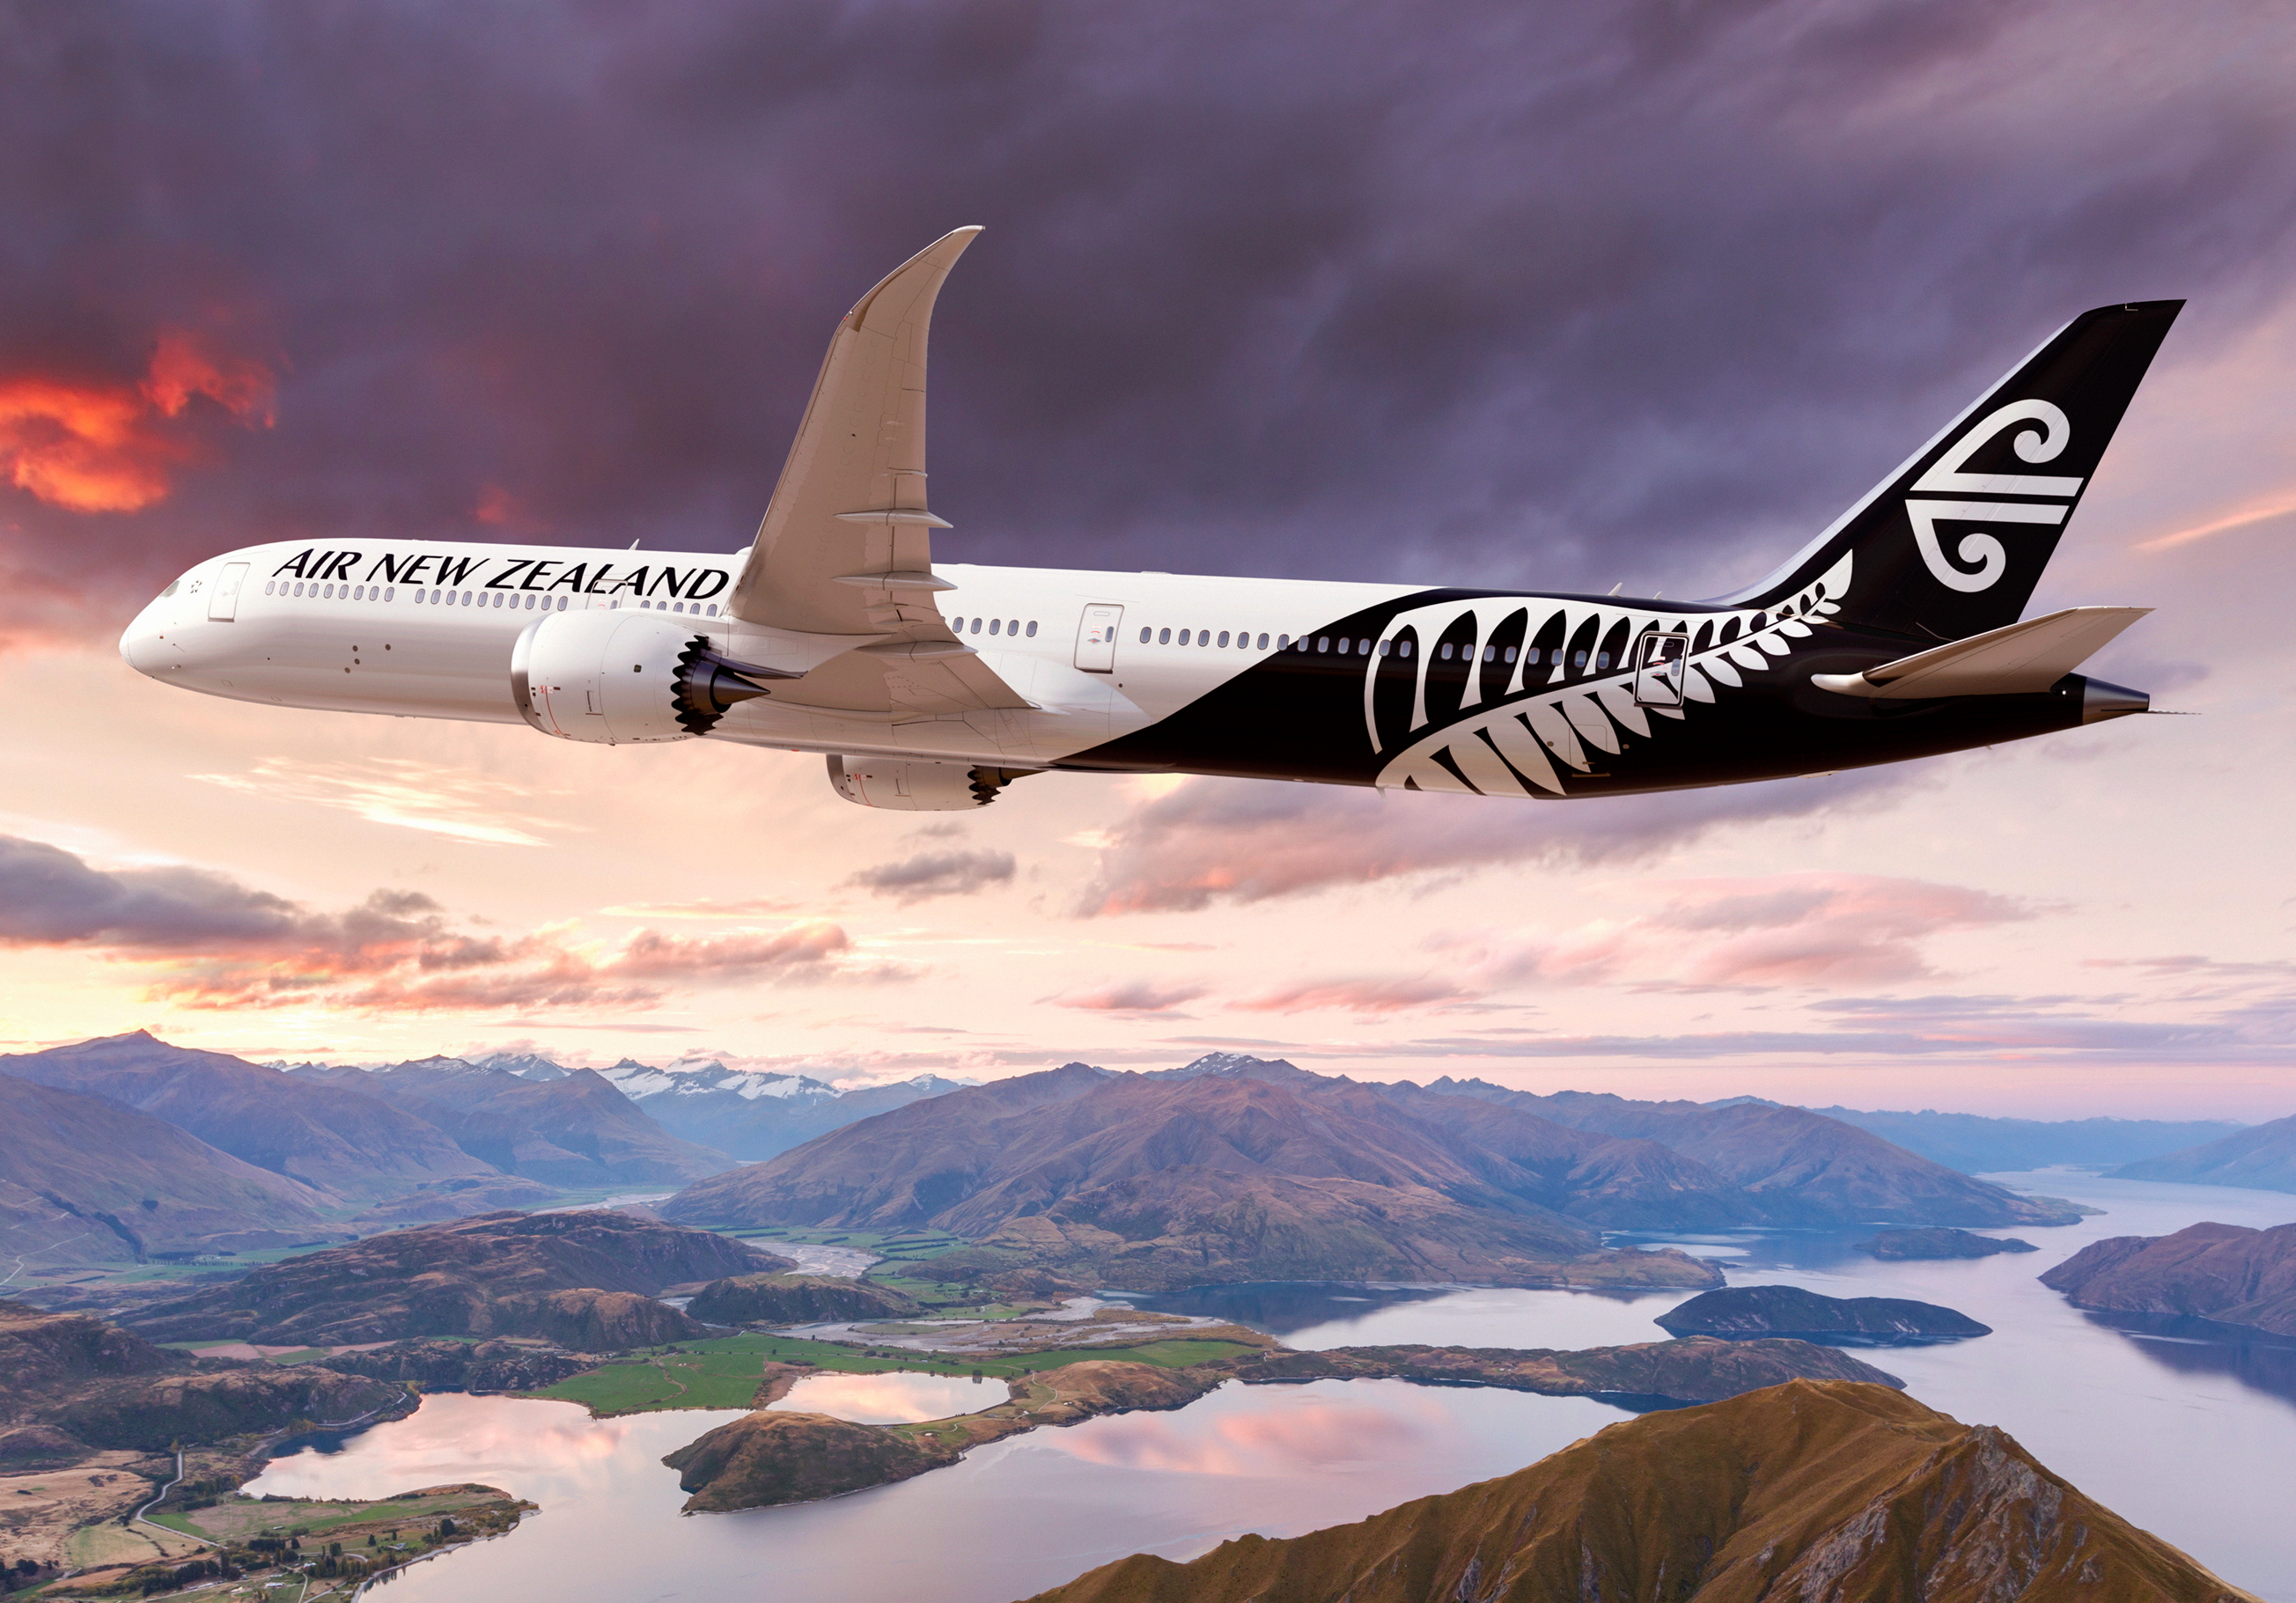 Air New Zealand has unveiled plans buy eight Boeing 787-10 airplanes, valued at $2.7 billion at list prices. The 787-10 is the largest member of the Dreamliner family. At 224 feet long (68 meters), the 787-10 can serve up to 330 passengers in a standard two-class configuration, about 40 more than the 787-9 airplane which Air New Zealand already operates. Click to enlarge.